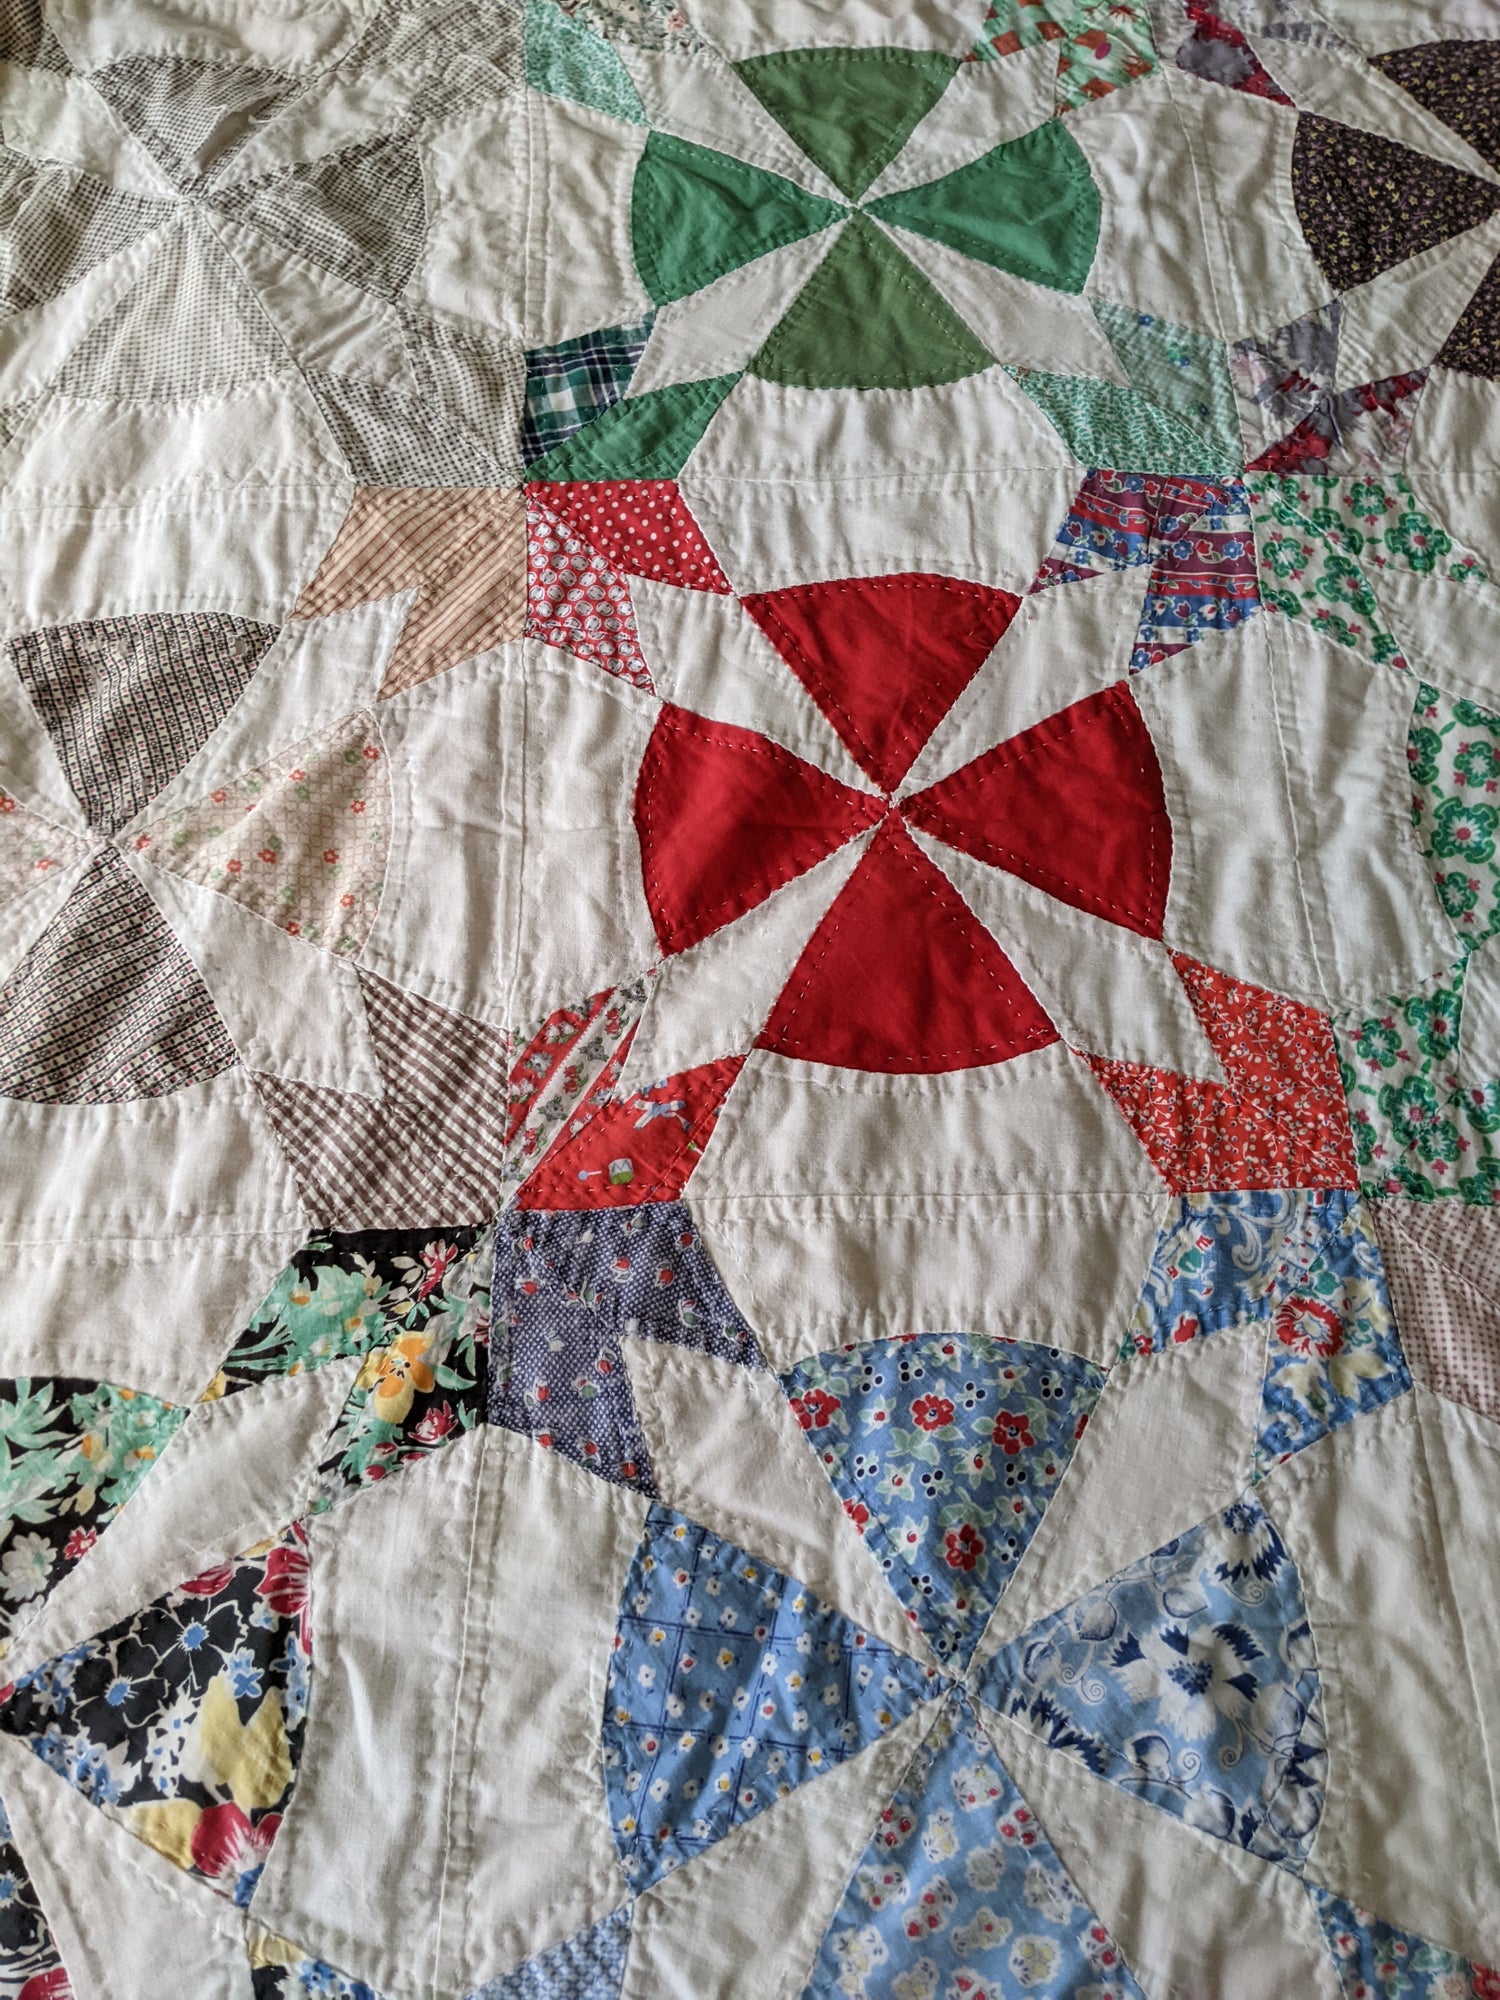 Vintage Quilts and Coats